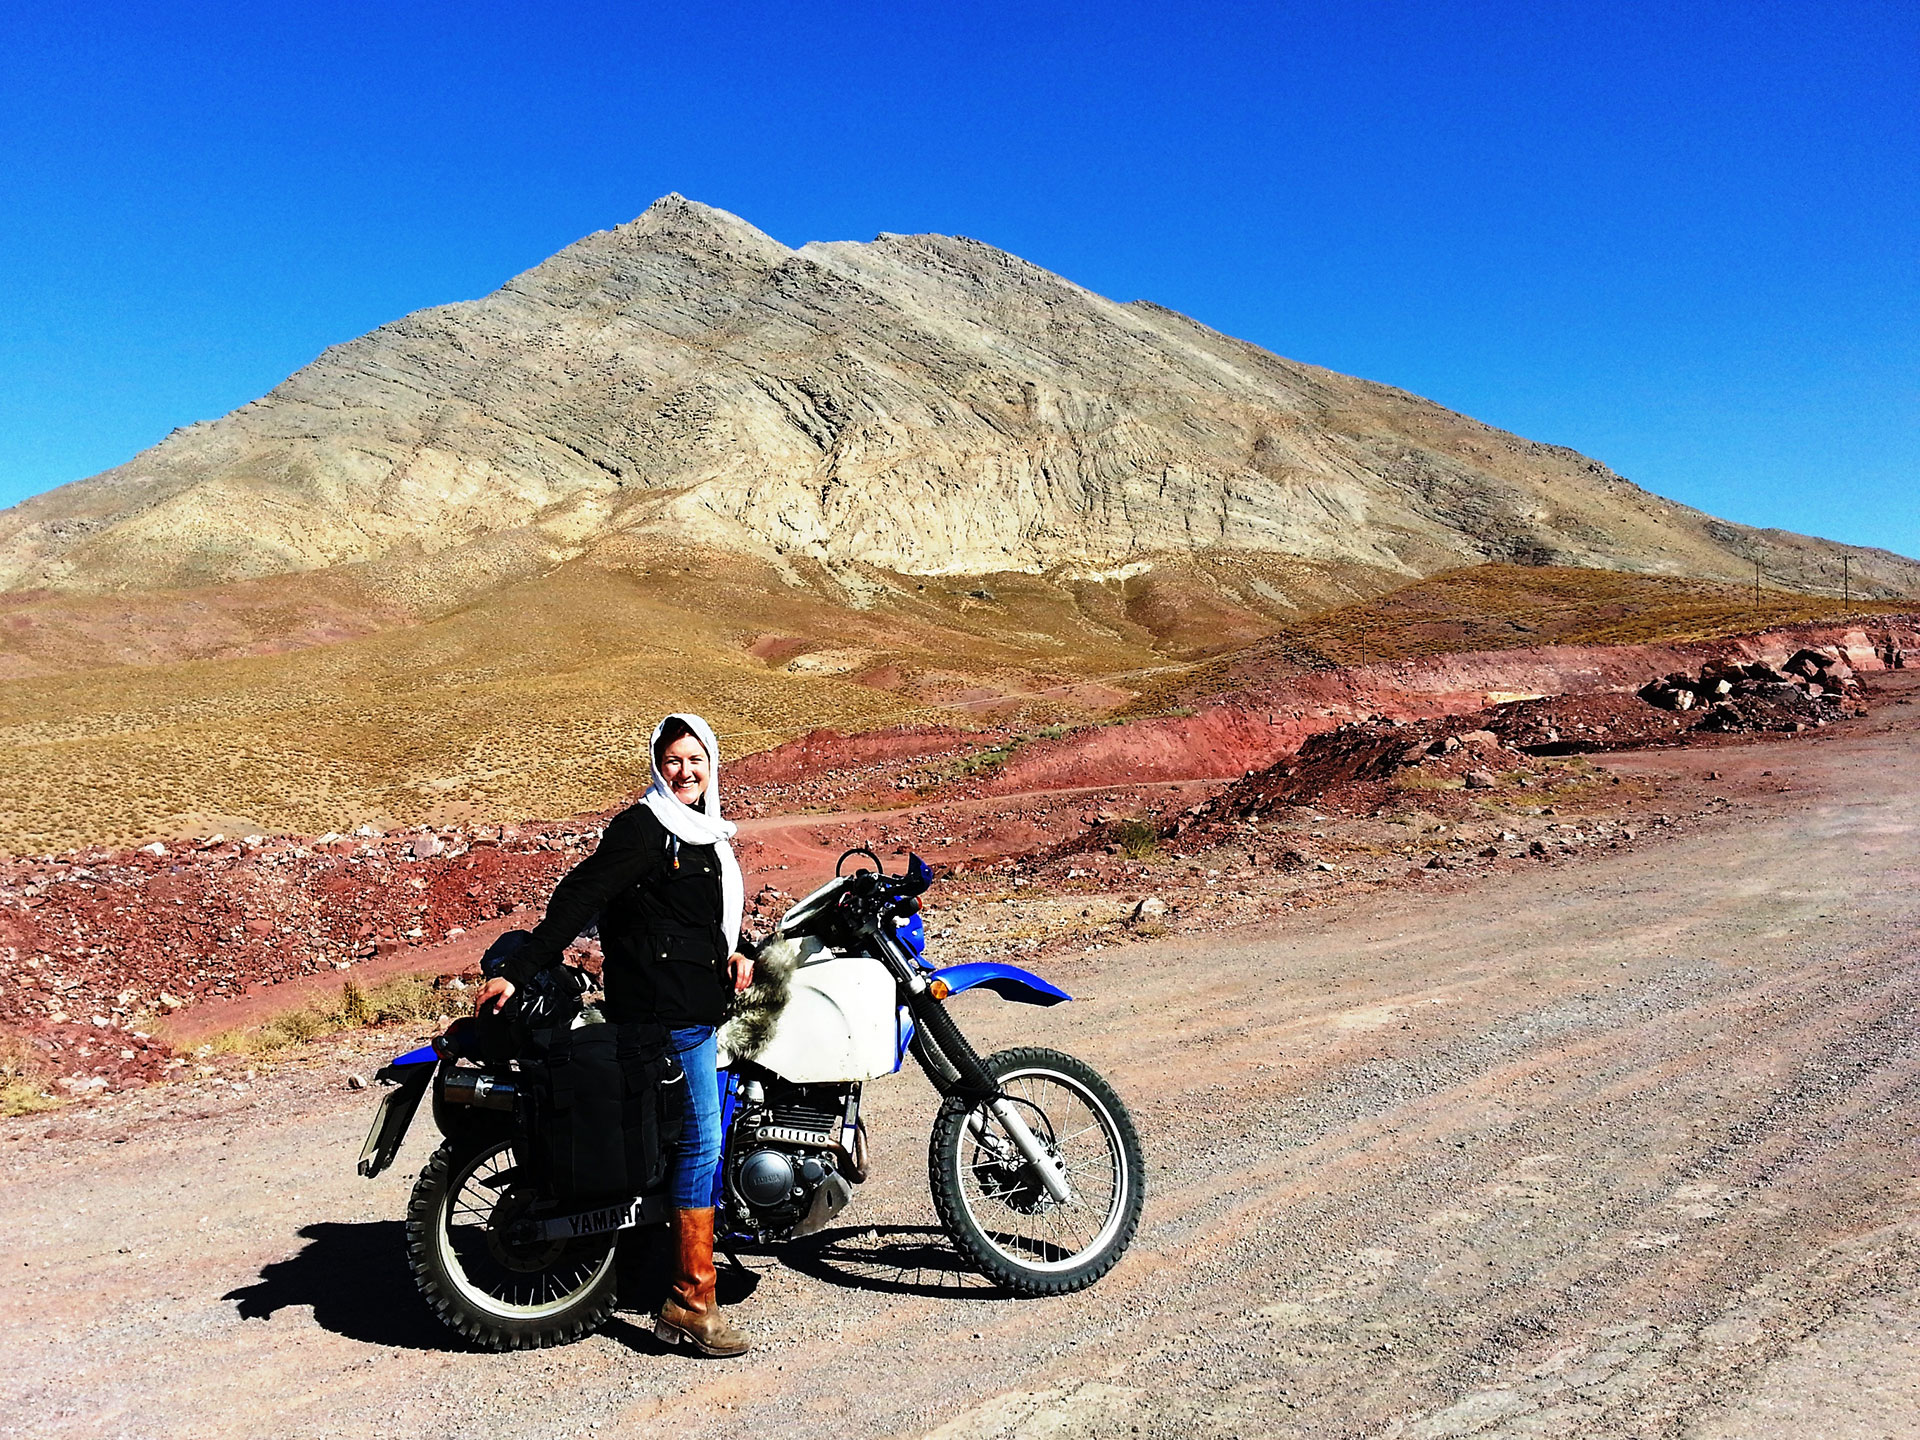 Motivational speaker Lois Pryce in the Iranian mountains with her motorbike, smiling